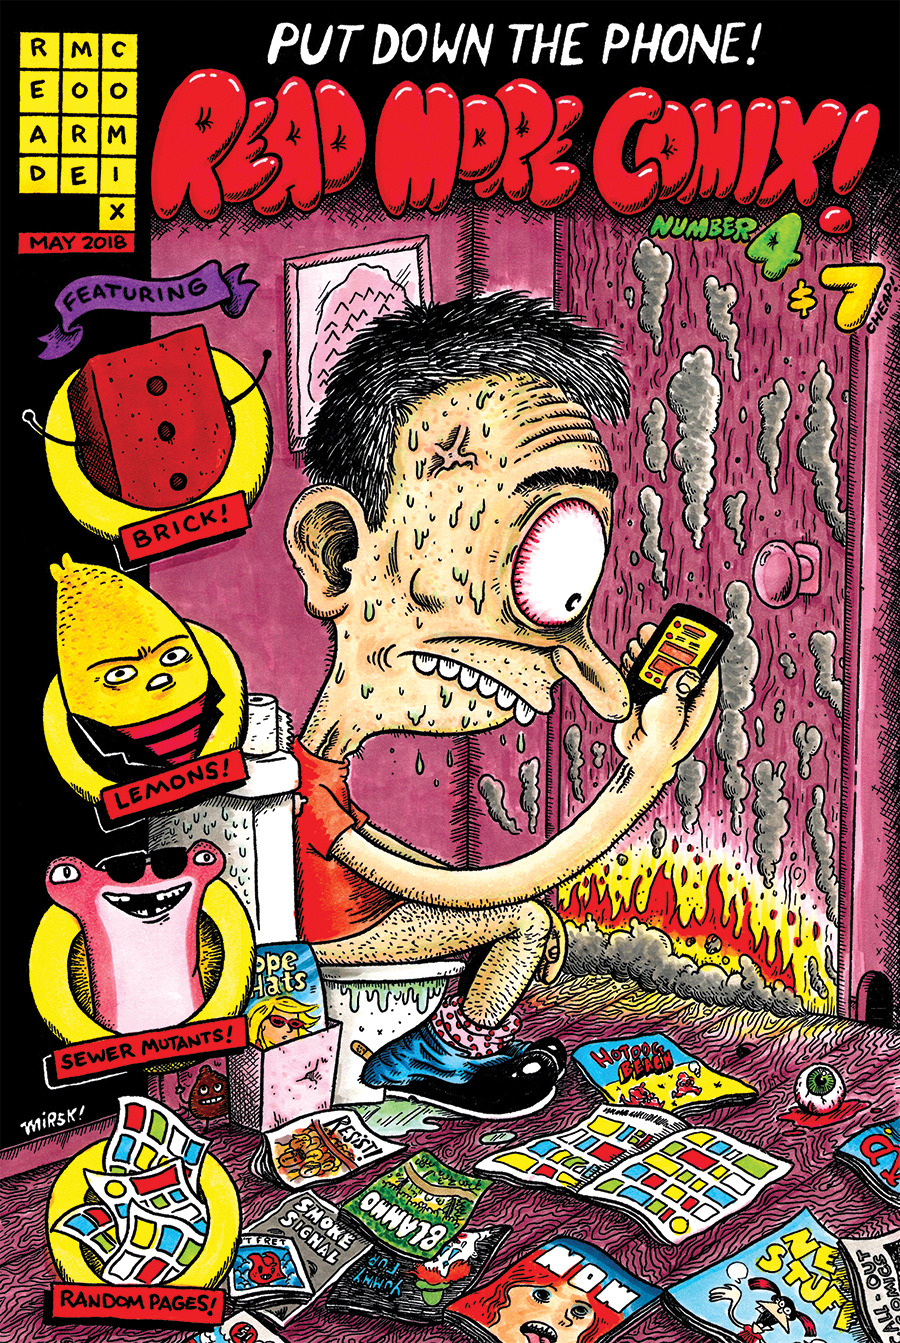 Read More Comix Number 4 by Robb Mirsky, James Spencer, and Dave Craig